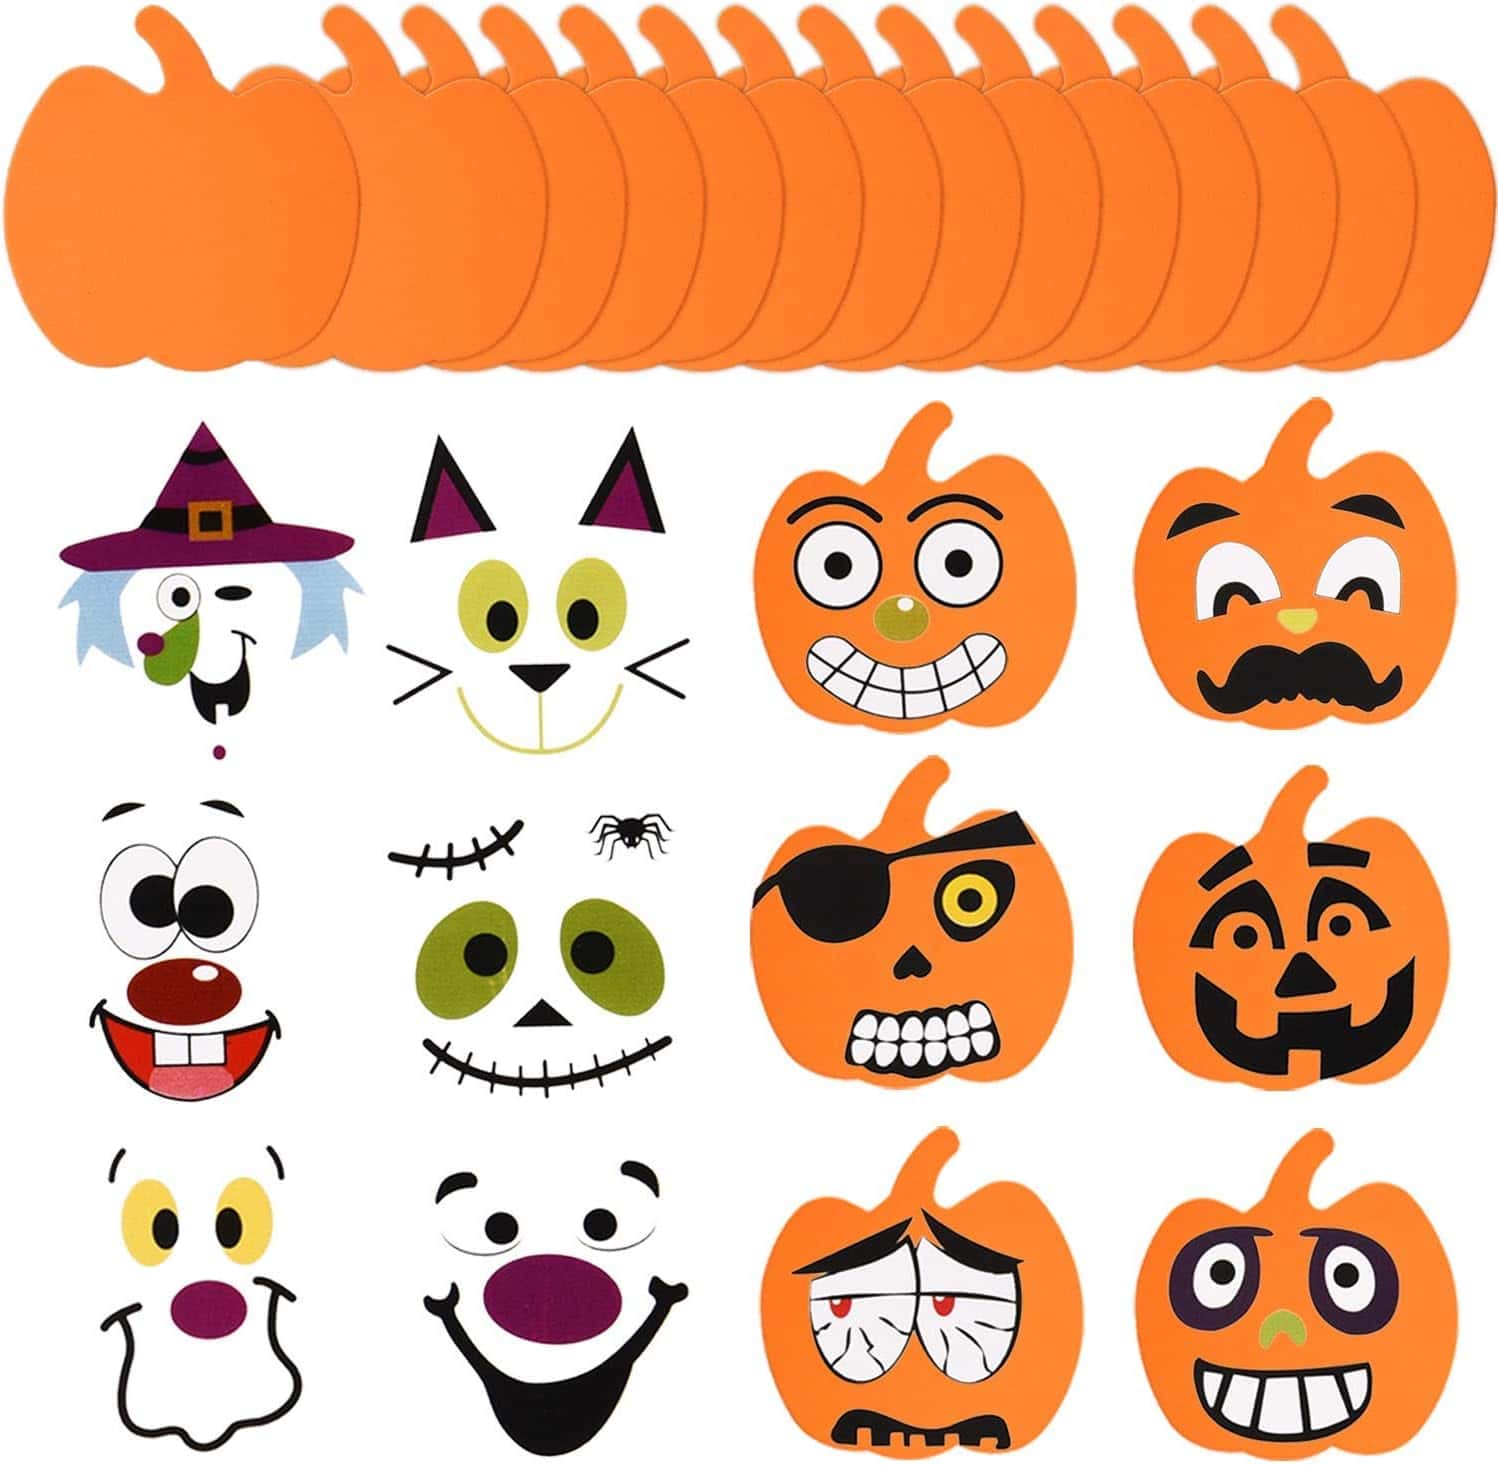 32 Pieces Halloween Foam Pumpkin Craft Kit and Pumpkin Foam Stickers Self Adhesive Halloween Stickers for Kid's Halloween Party Crafts Decorations